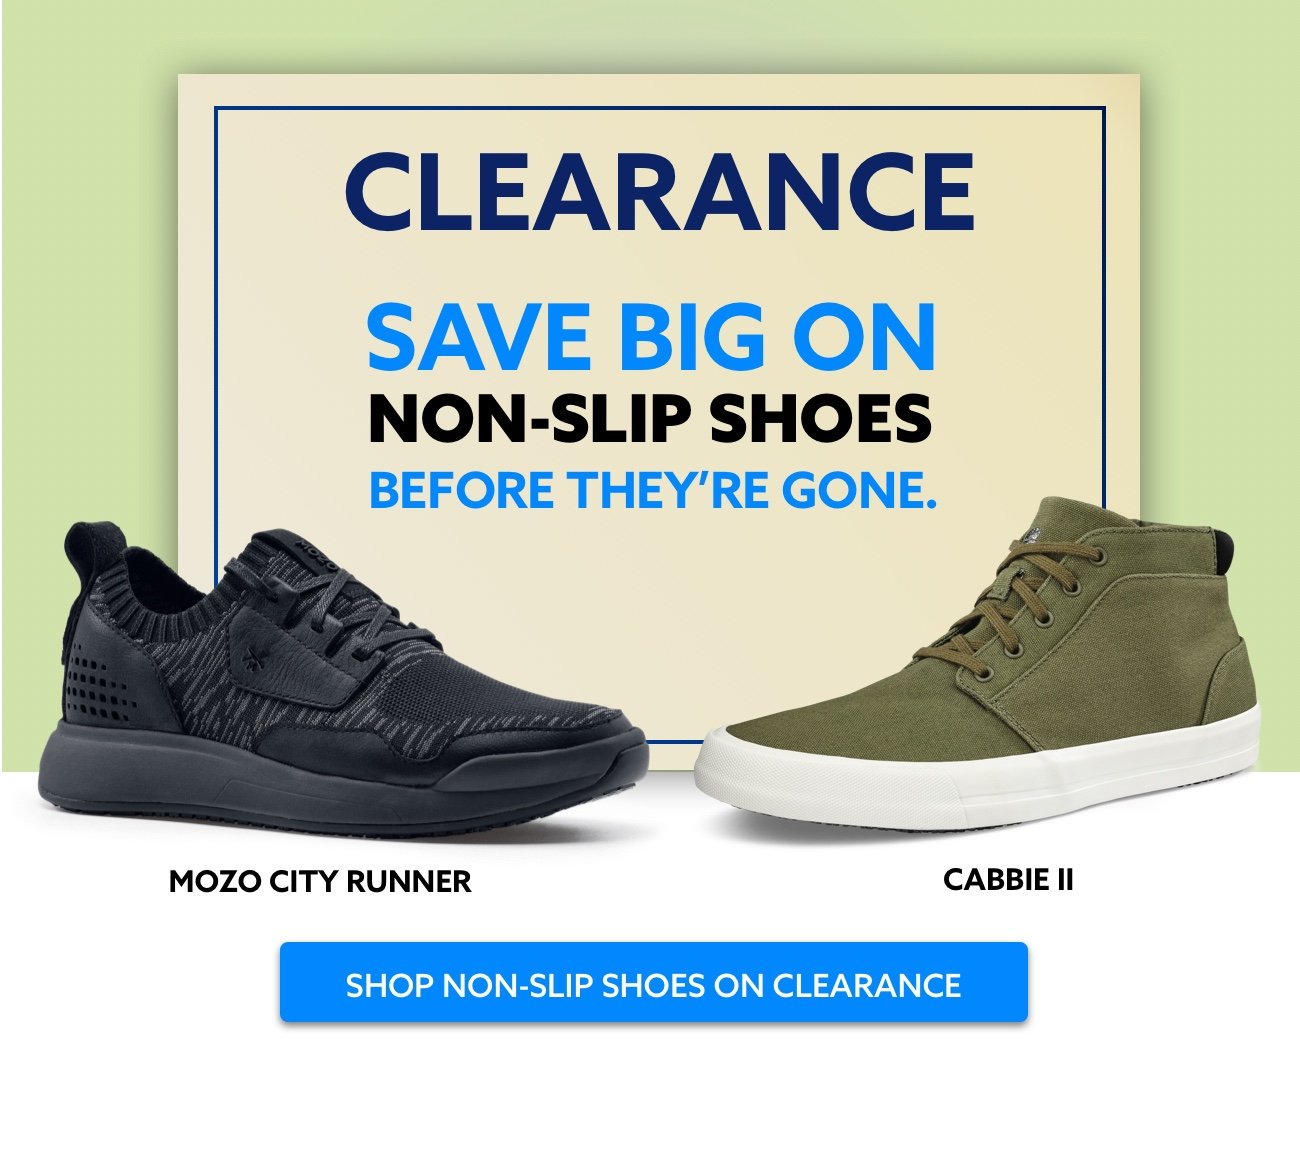 Shop Non-Slip Shoes on Clearance.